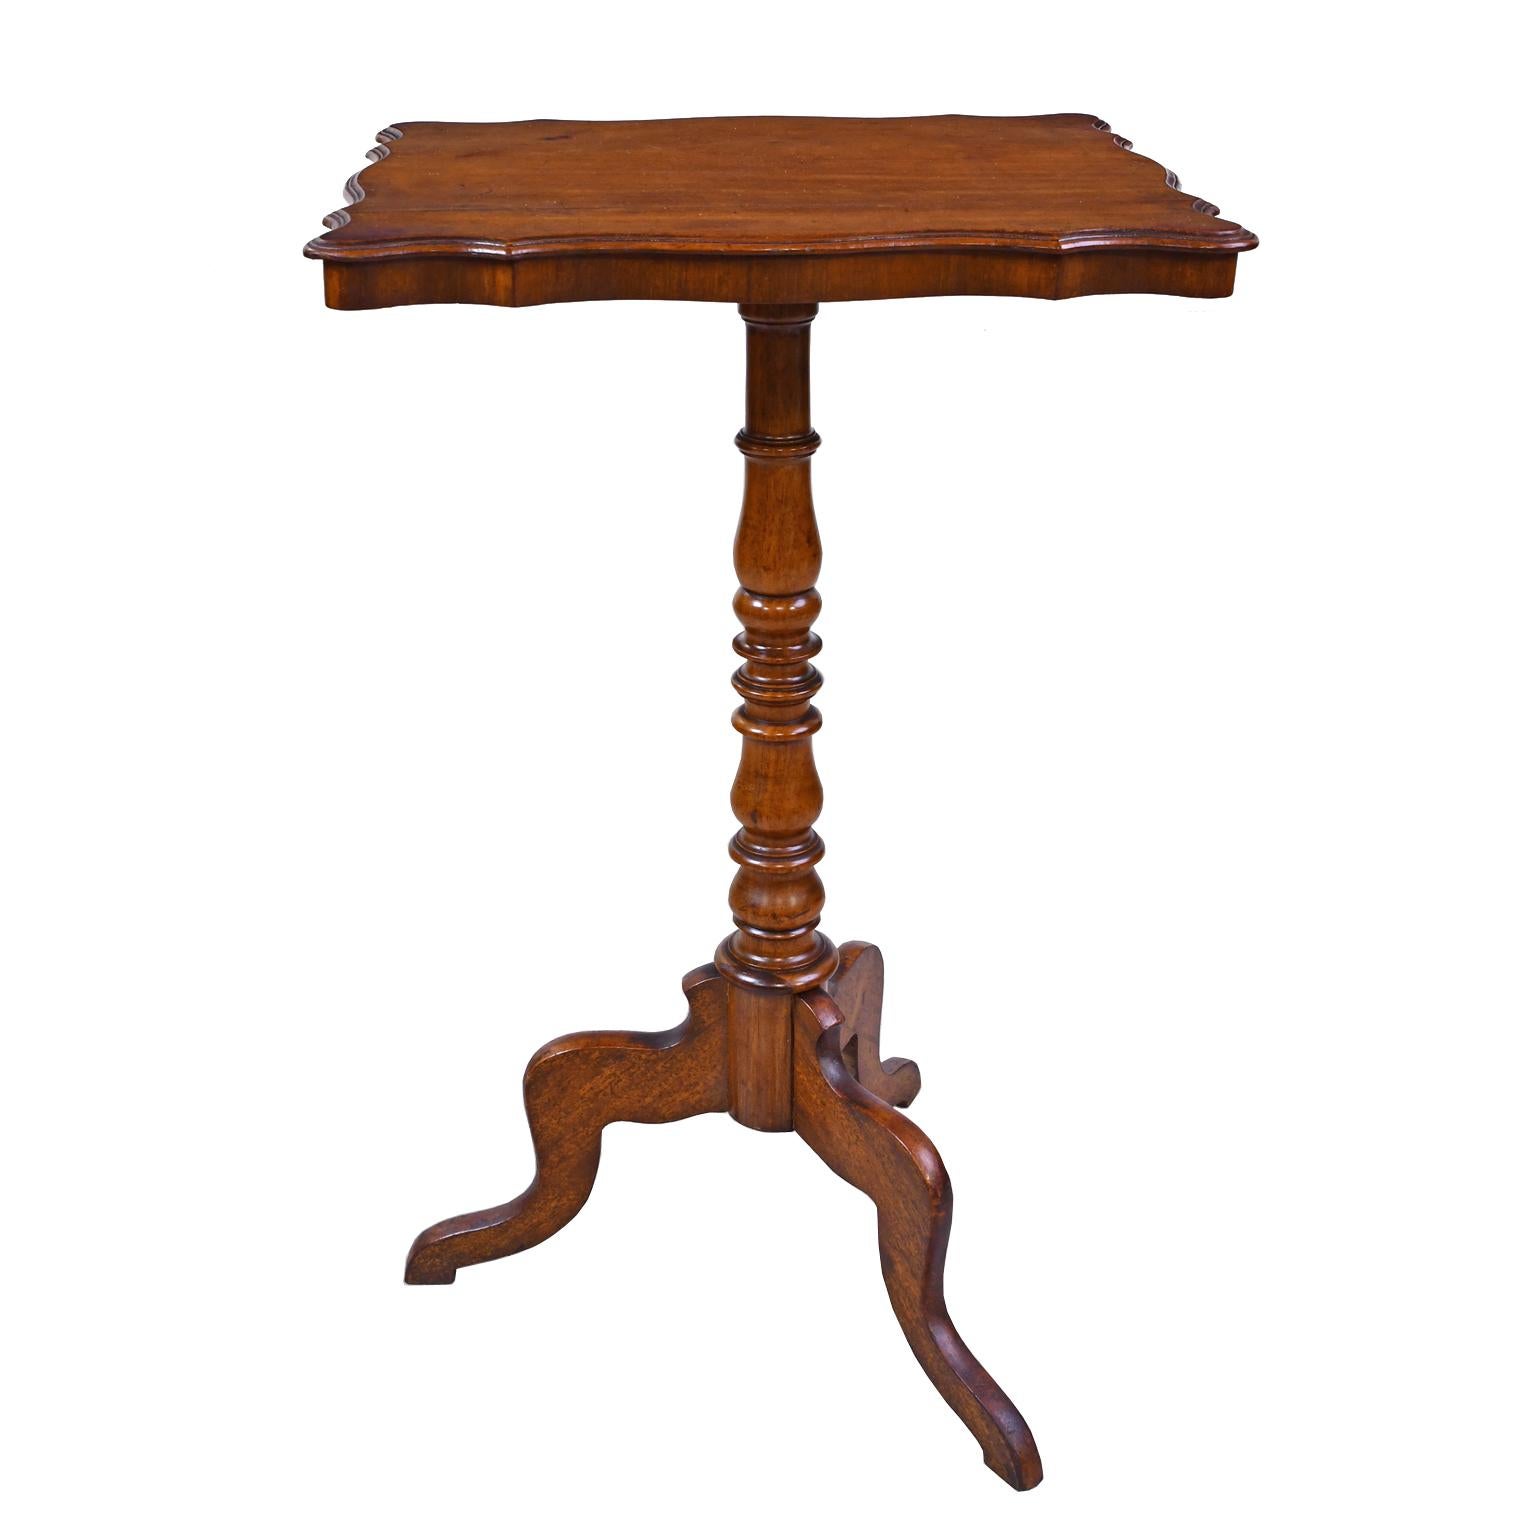 A handsome wine table or candlestand in walnut on tripod pedestal base with turned column resting on cabriole legs. European, possibly Dutch or German, circa 1825.
Measurements: 20 1/2